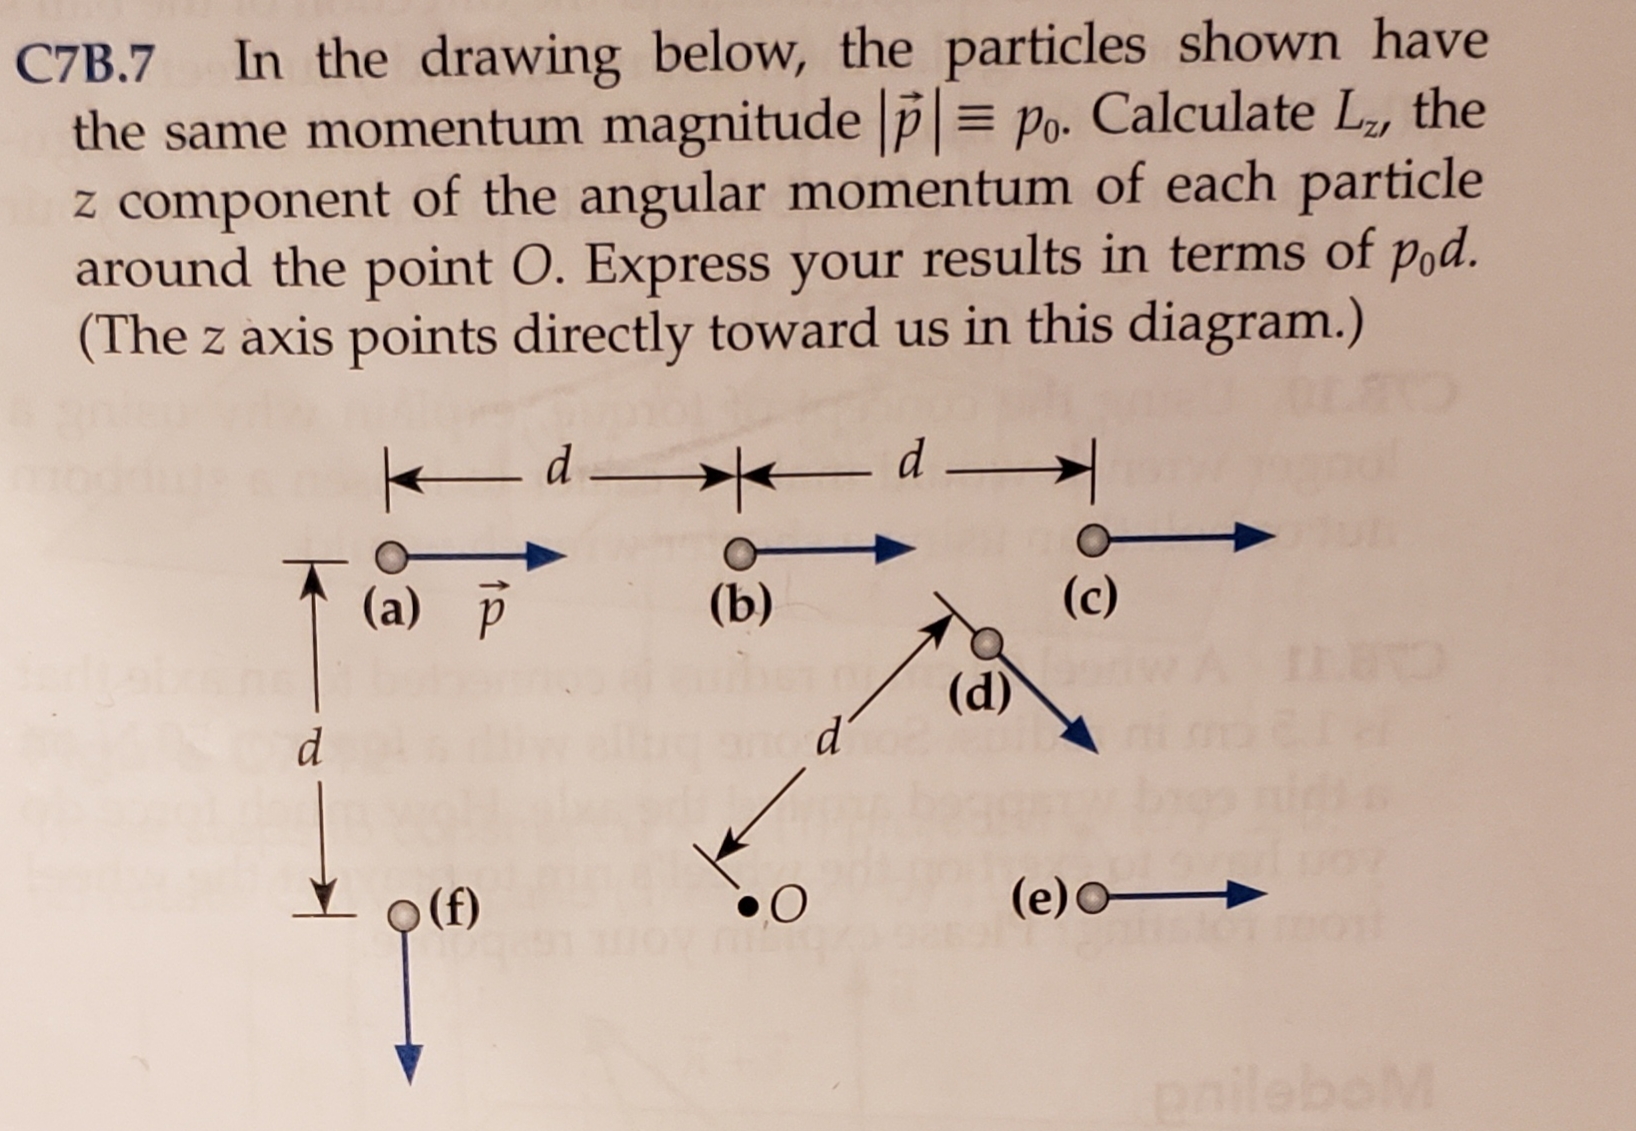 In the drawing below, the particles shown have
the same momentum magnitude p|= po. Calculate La, the
z component of the angular momentum of each particle
around the point O. Express your results in terms of pod.
(The z axis points directly toward us in this diagram.)
C7B.7
- d
(c)
(a) P
(b)
aTC
(d)
d
(е)0—
(f)
alebo M
